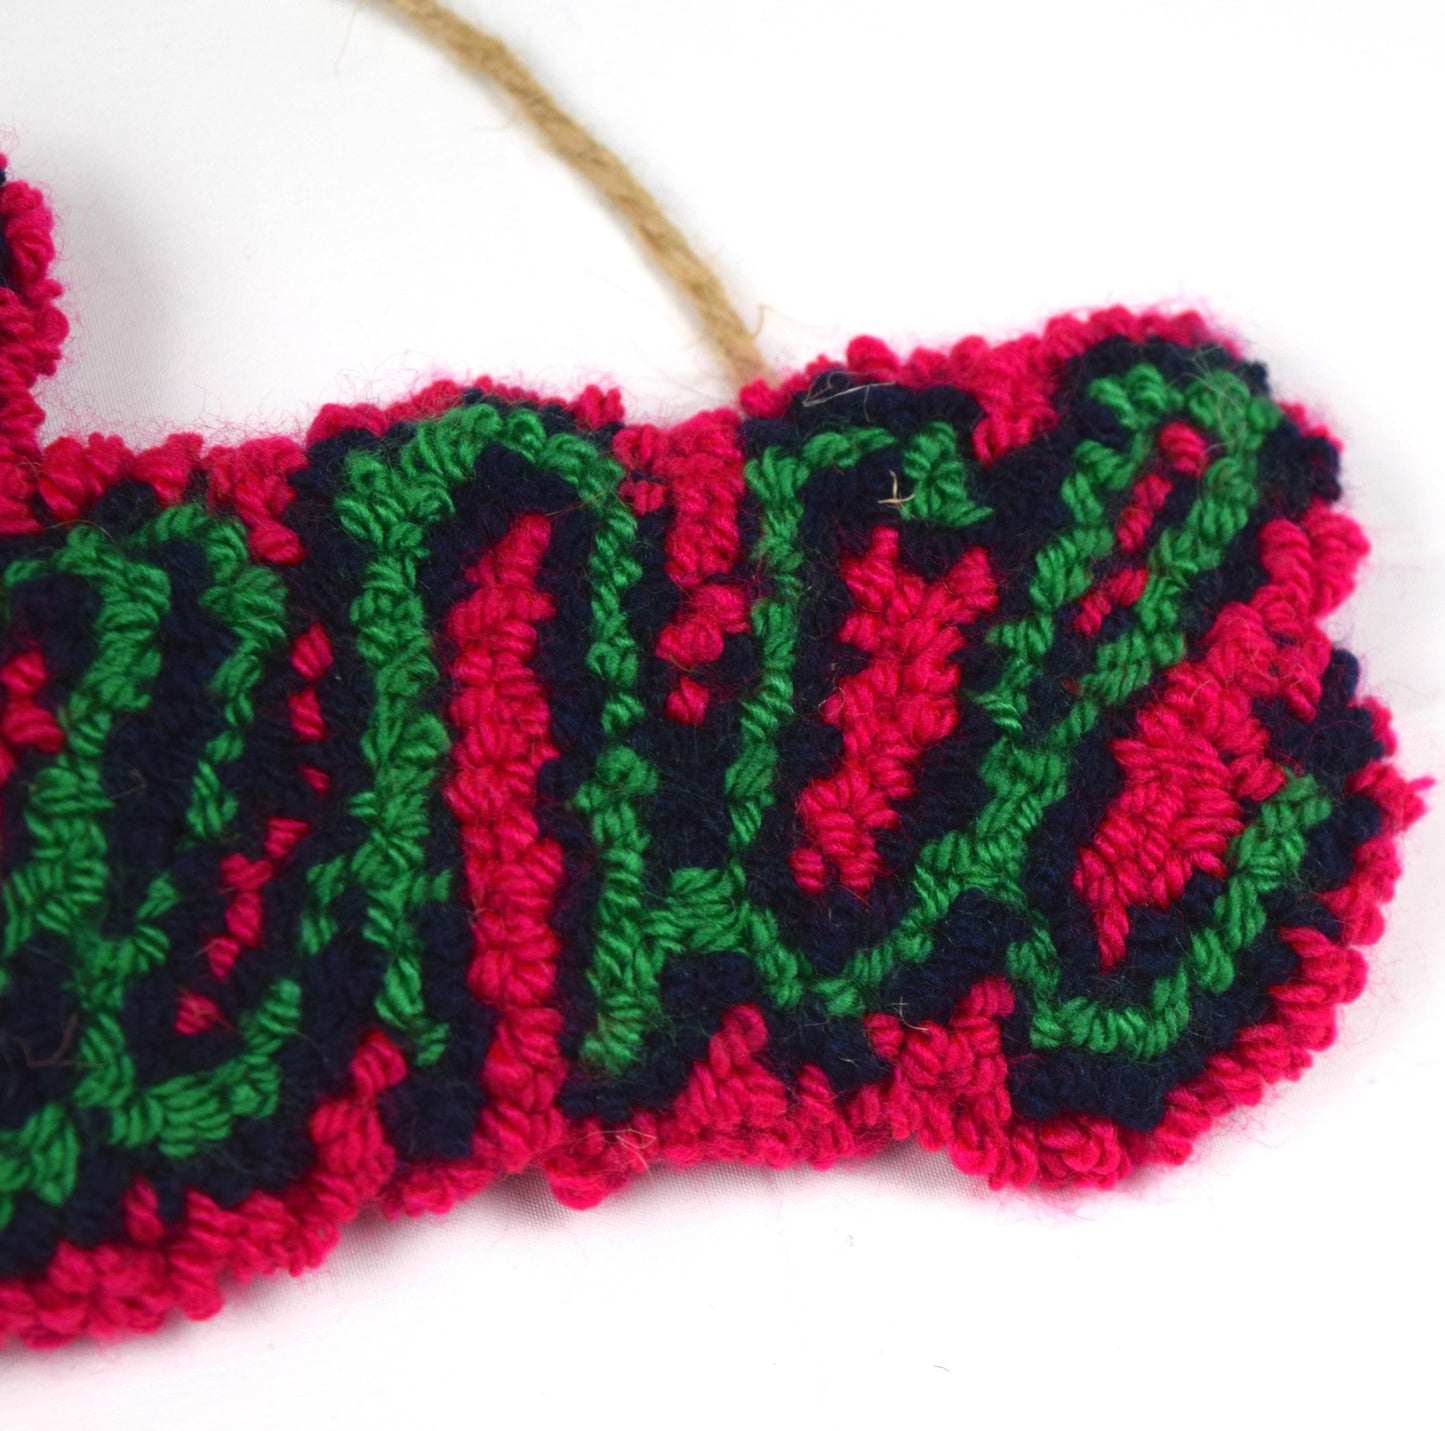 A flowing hand punched DANCE in a slanted shadow text in Neon Pink, Navy and Green using yarn from a previous project close up.